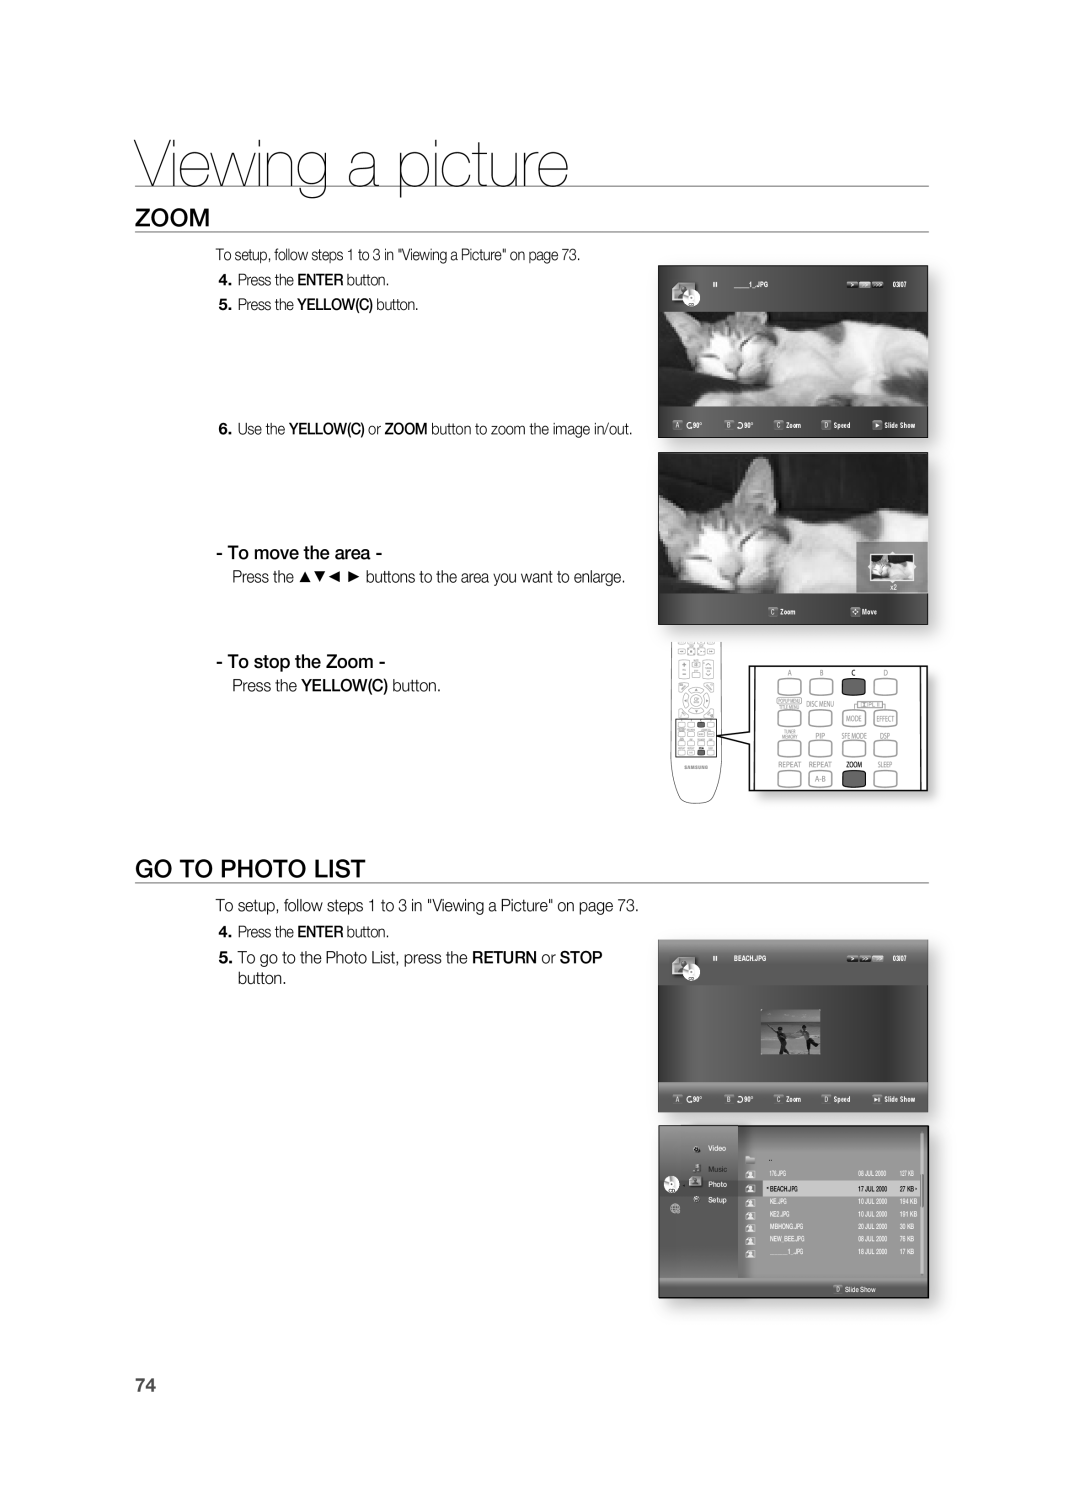 Samsung HT-BD3252 user manual Go To Photo List, Viewing a picture, To move the area, To stop the Zoom 